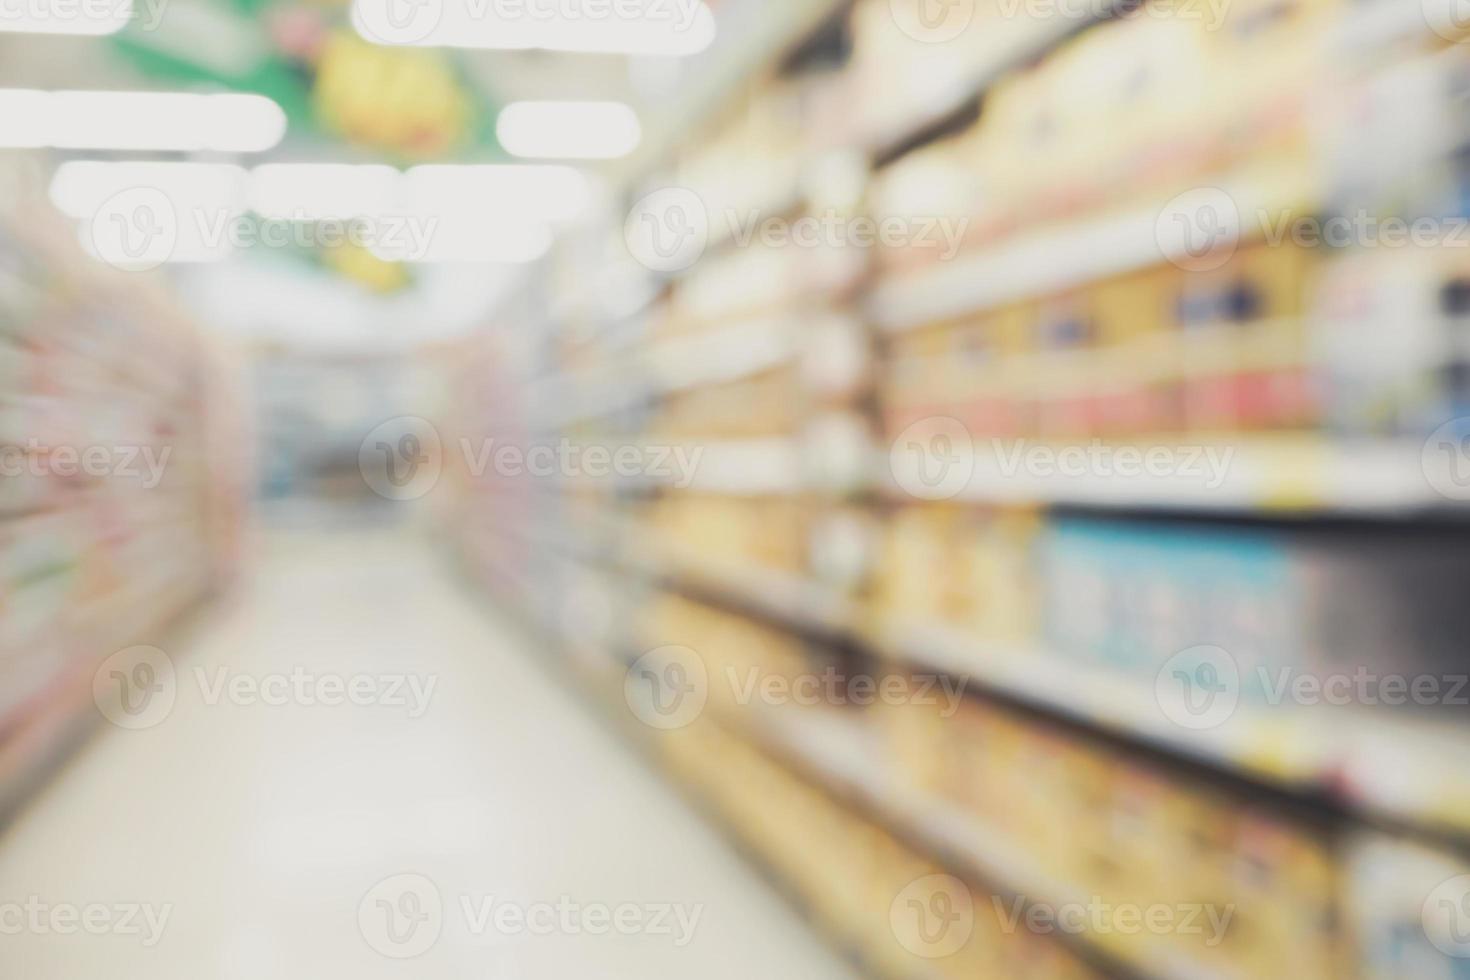 Abstract supermarket aisle shelves blurred background photo